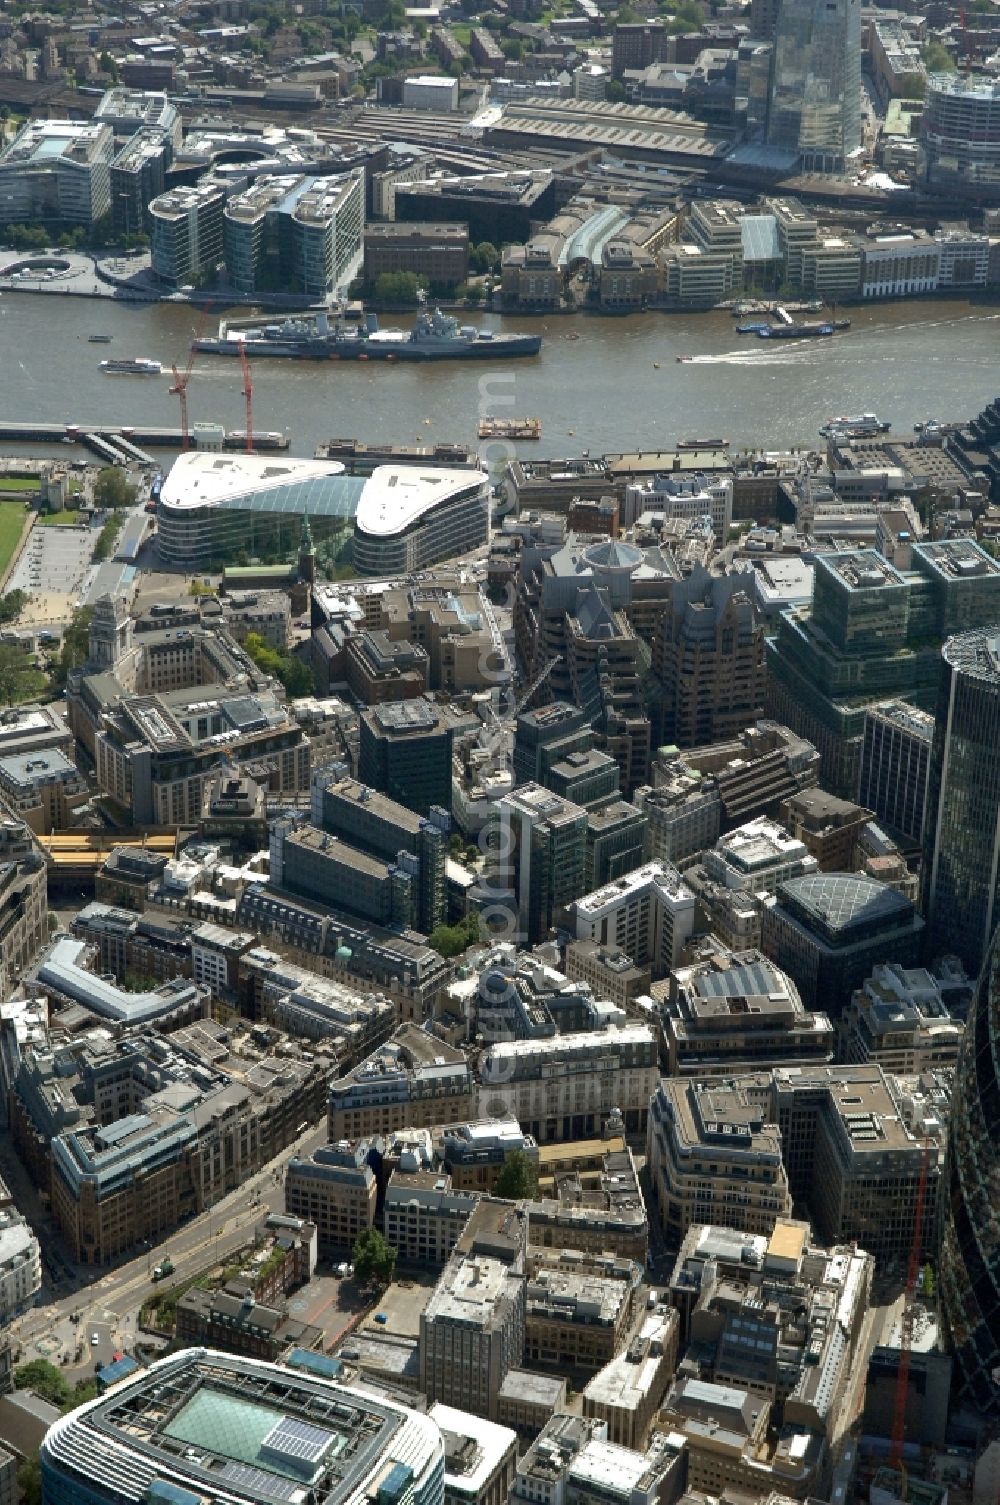 London from the bird's eye view: City view of London at the Thames in England